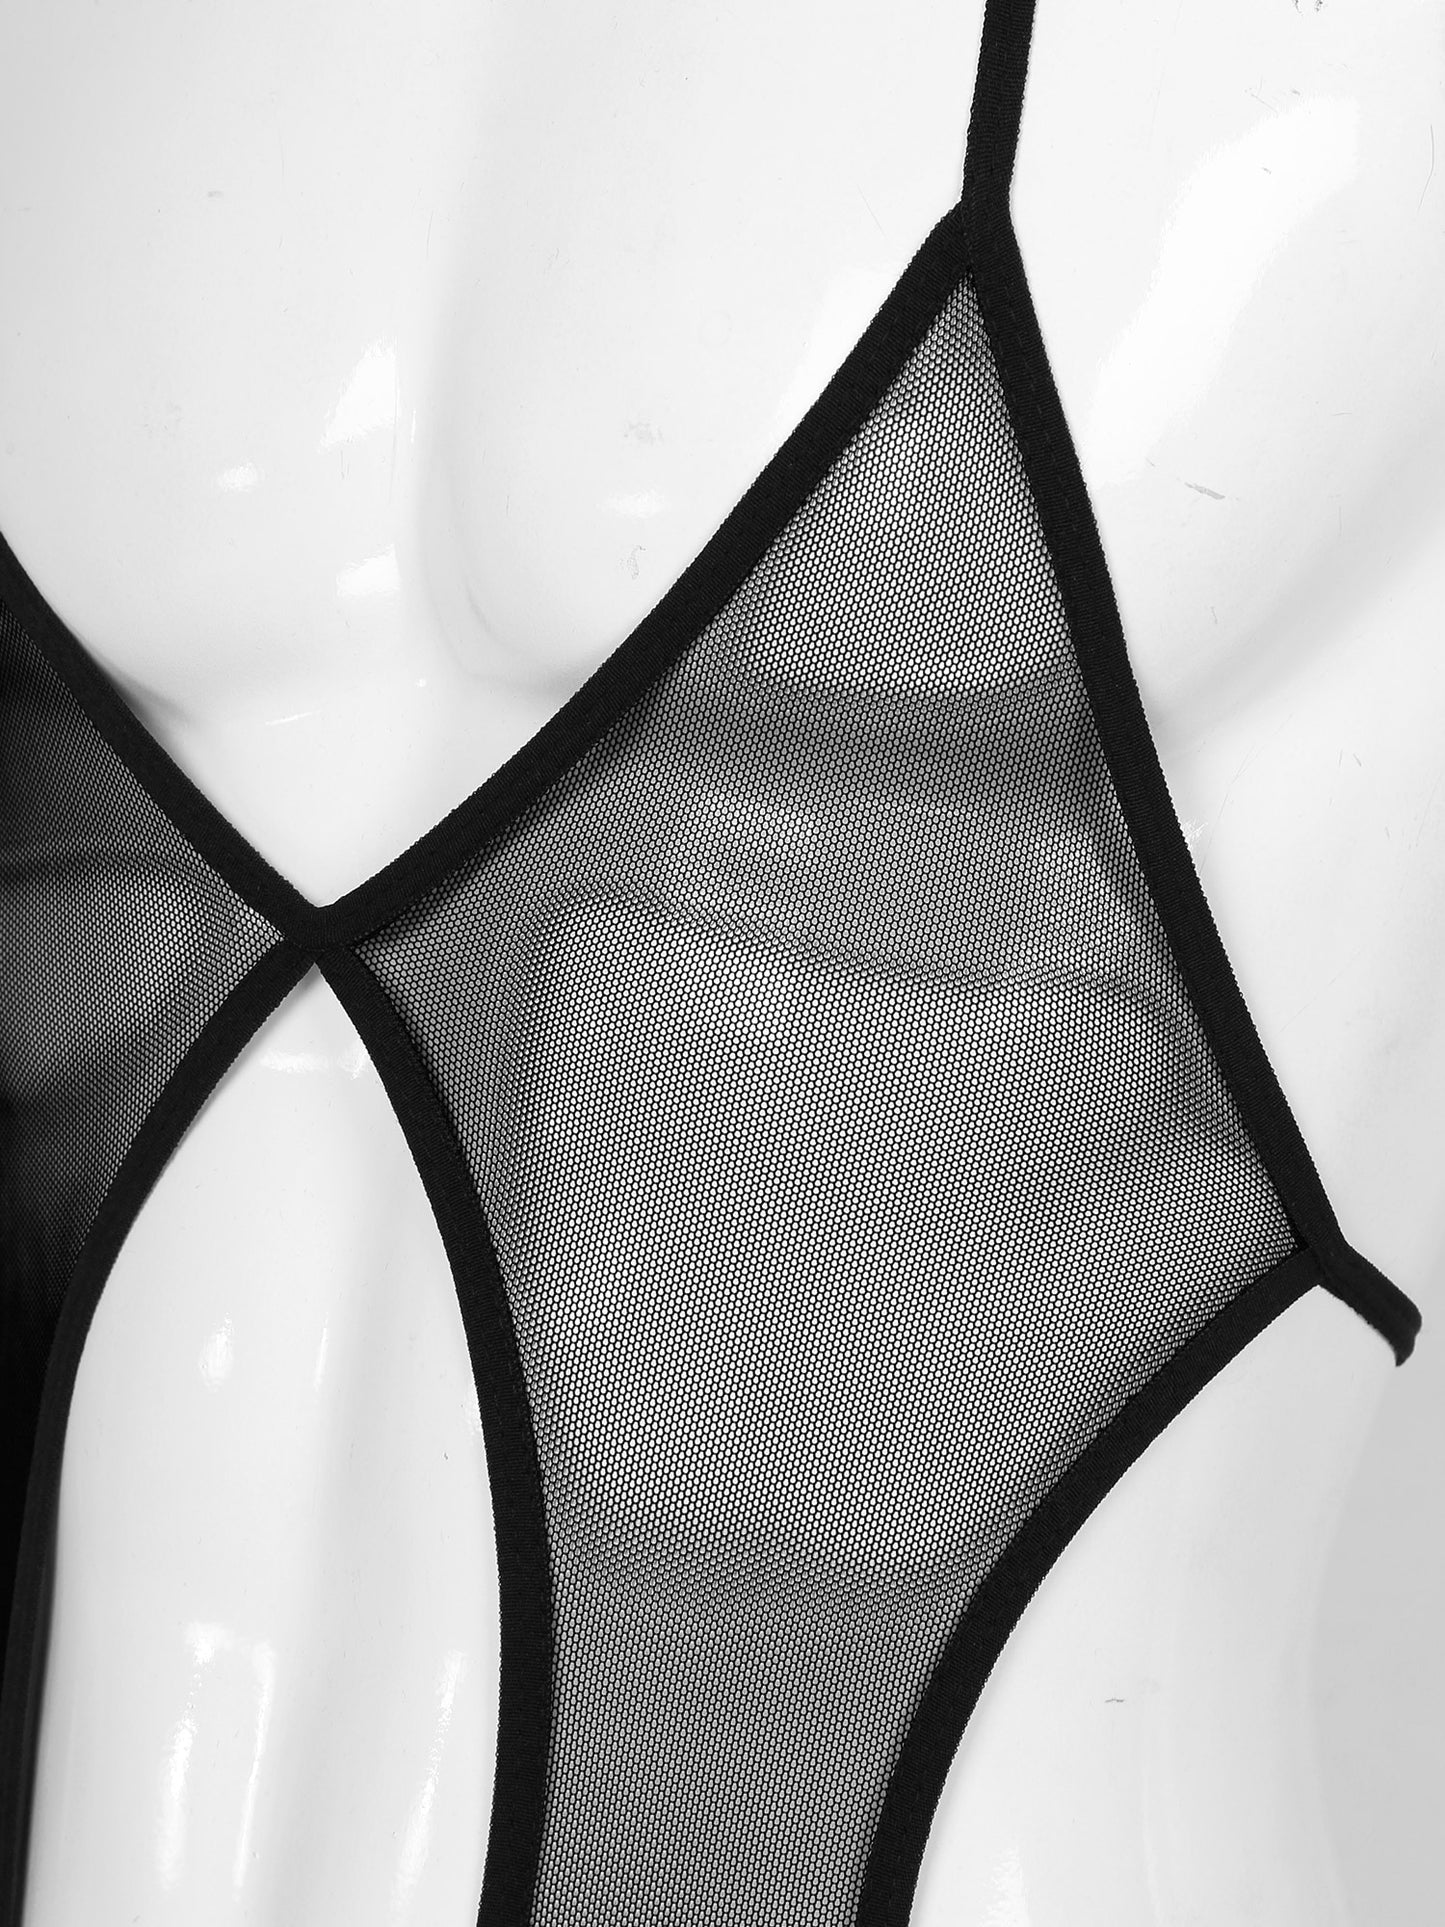 See-through Mesh Bodysuit: Seductive Lingerie for Sissy Role Play